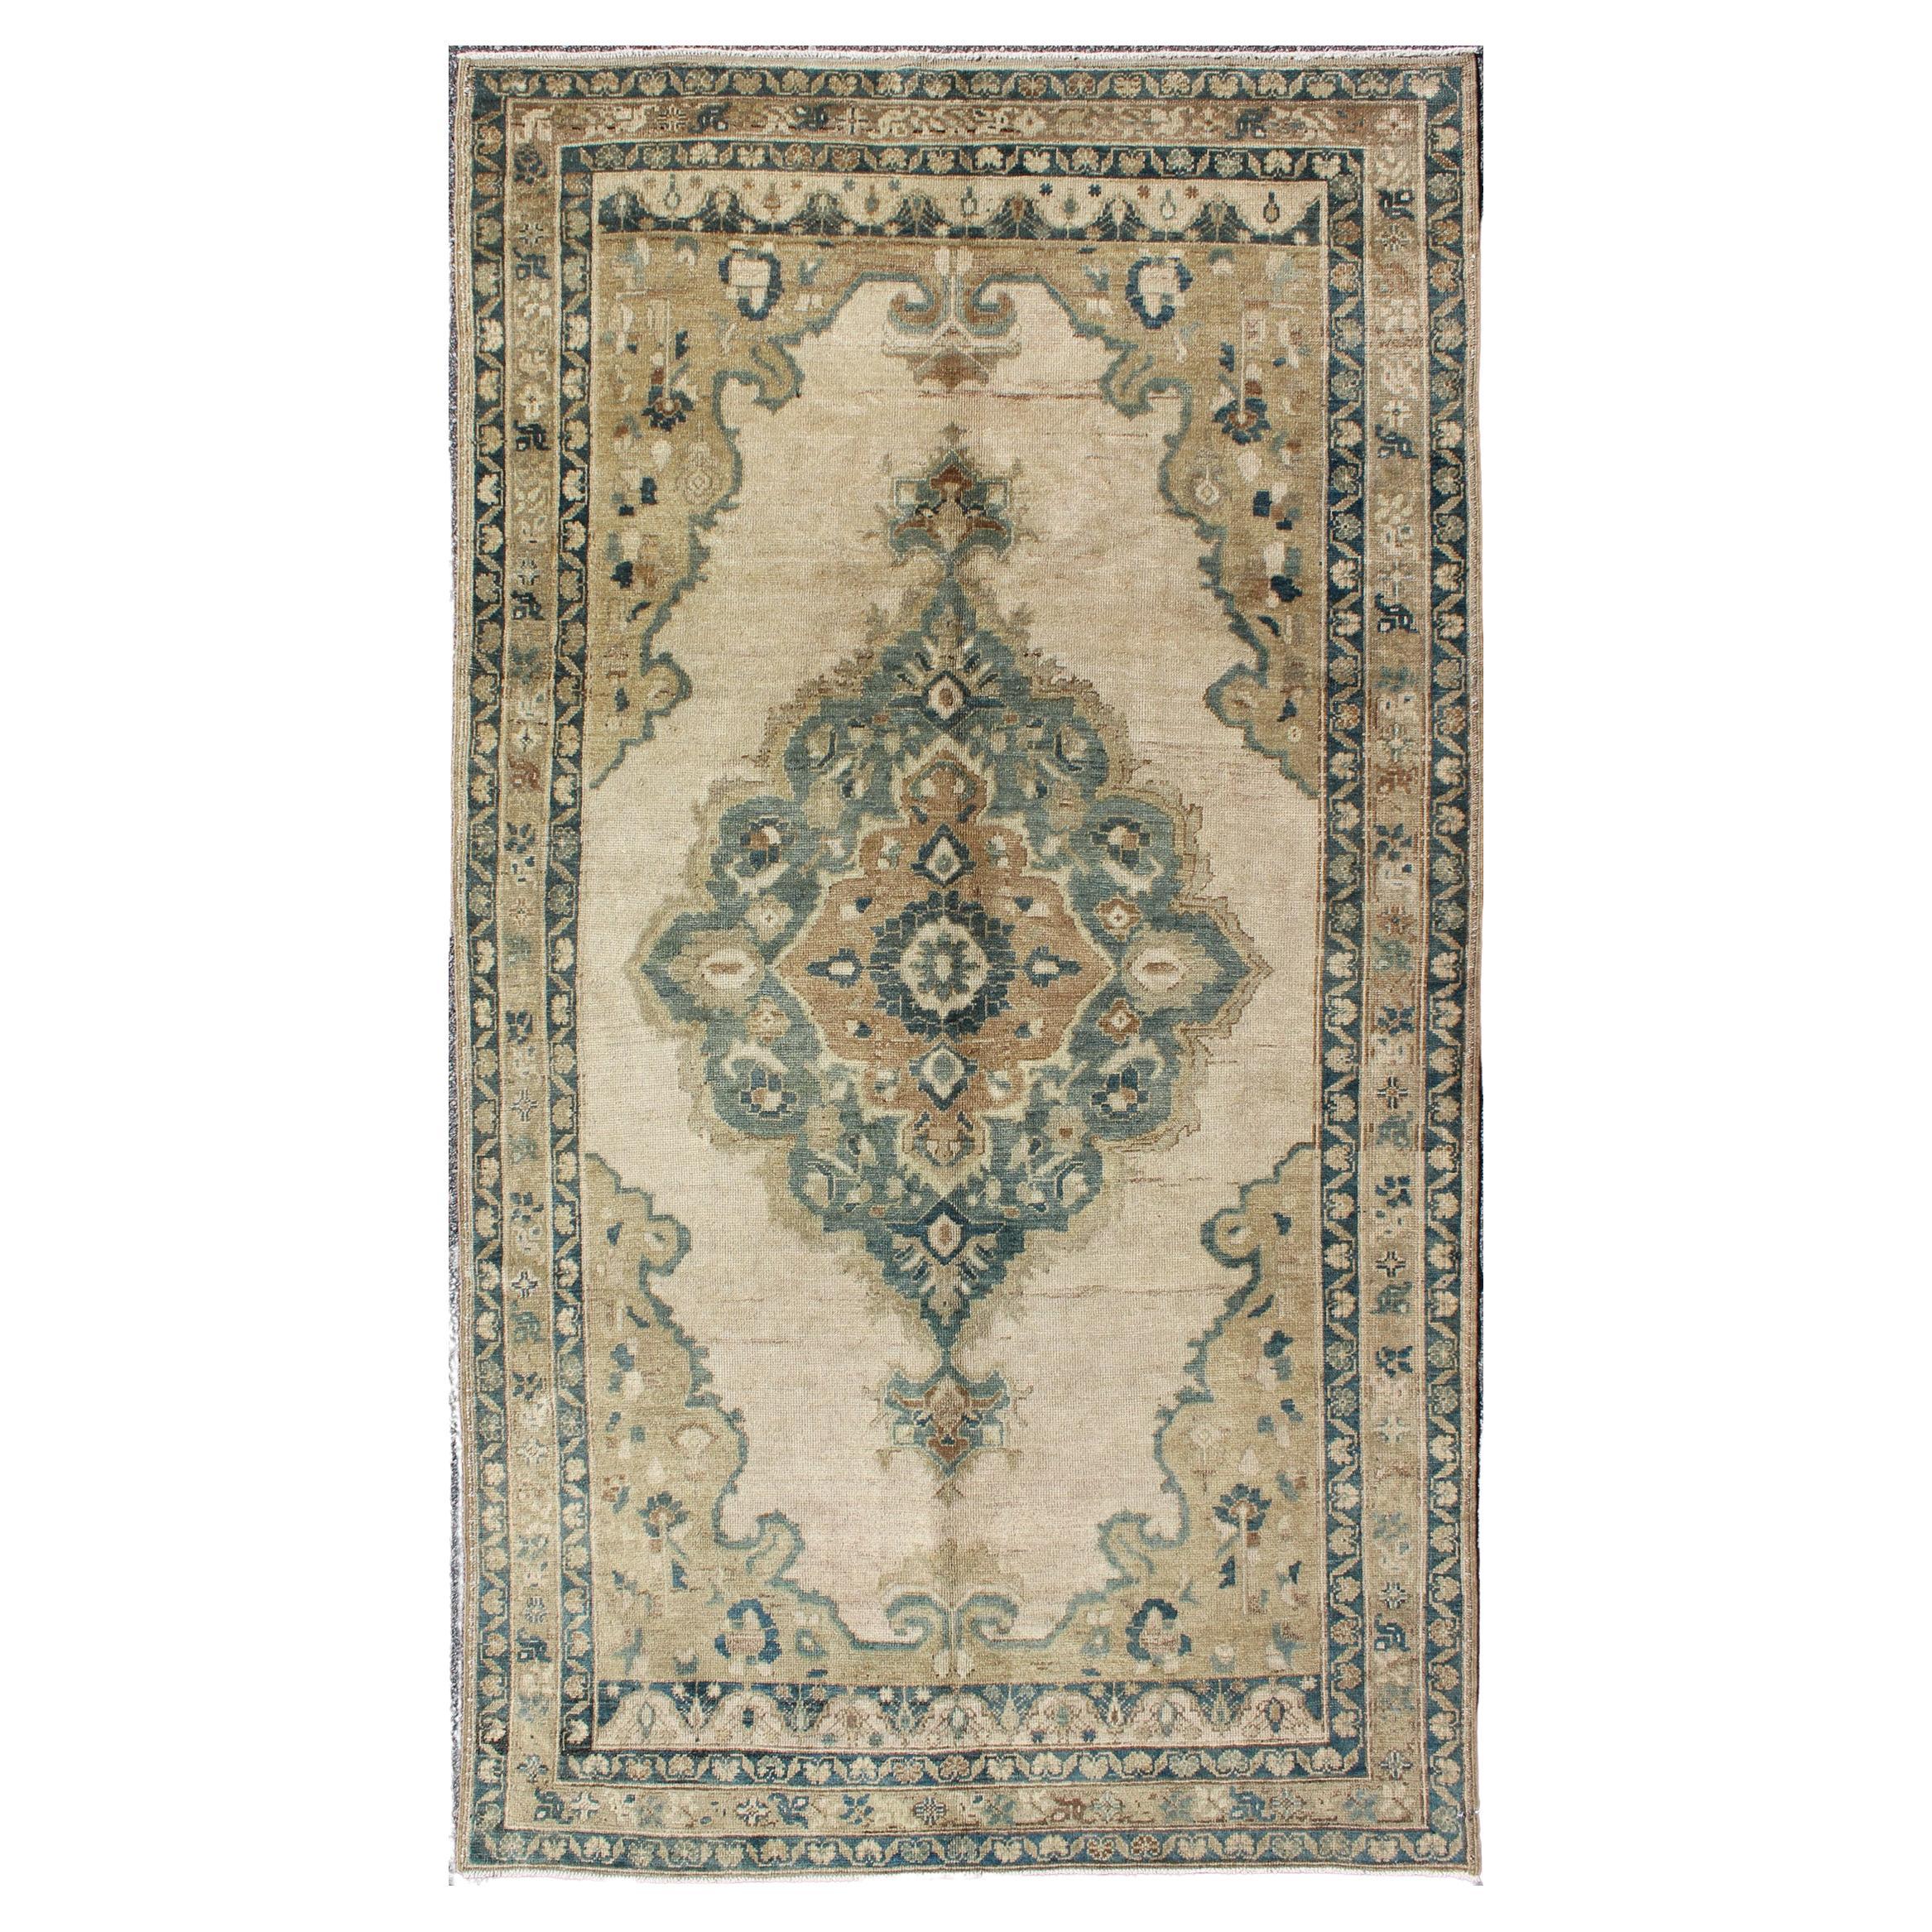 Vintage Oushak Rug with Floral Design in Blue/Green, Taupe, Ivory & Yellow Green